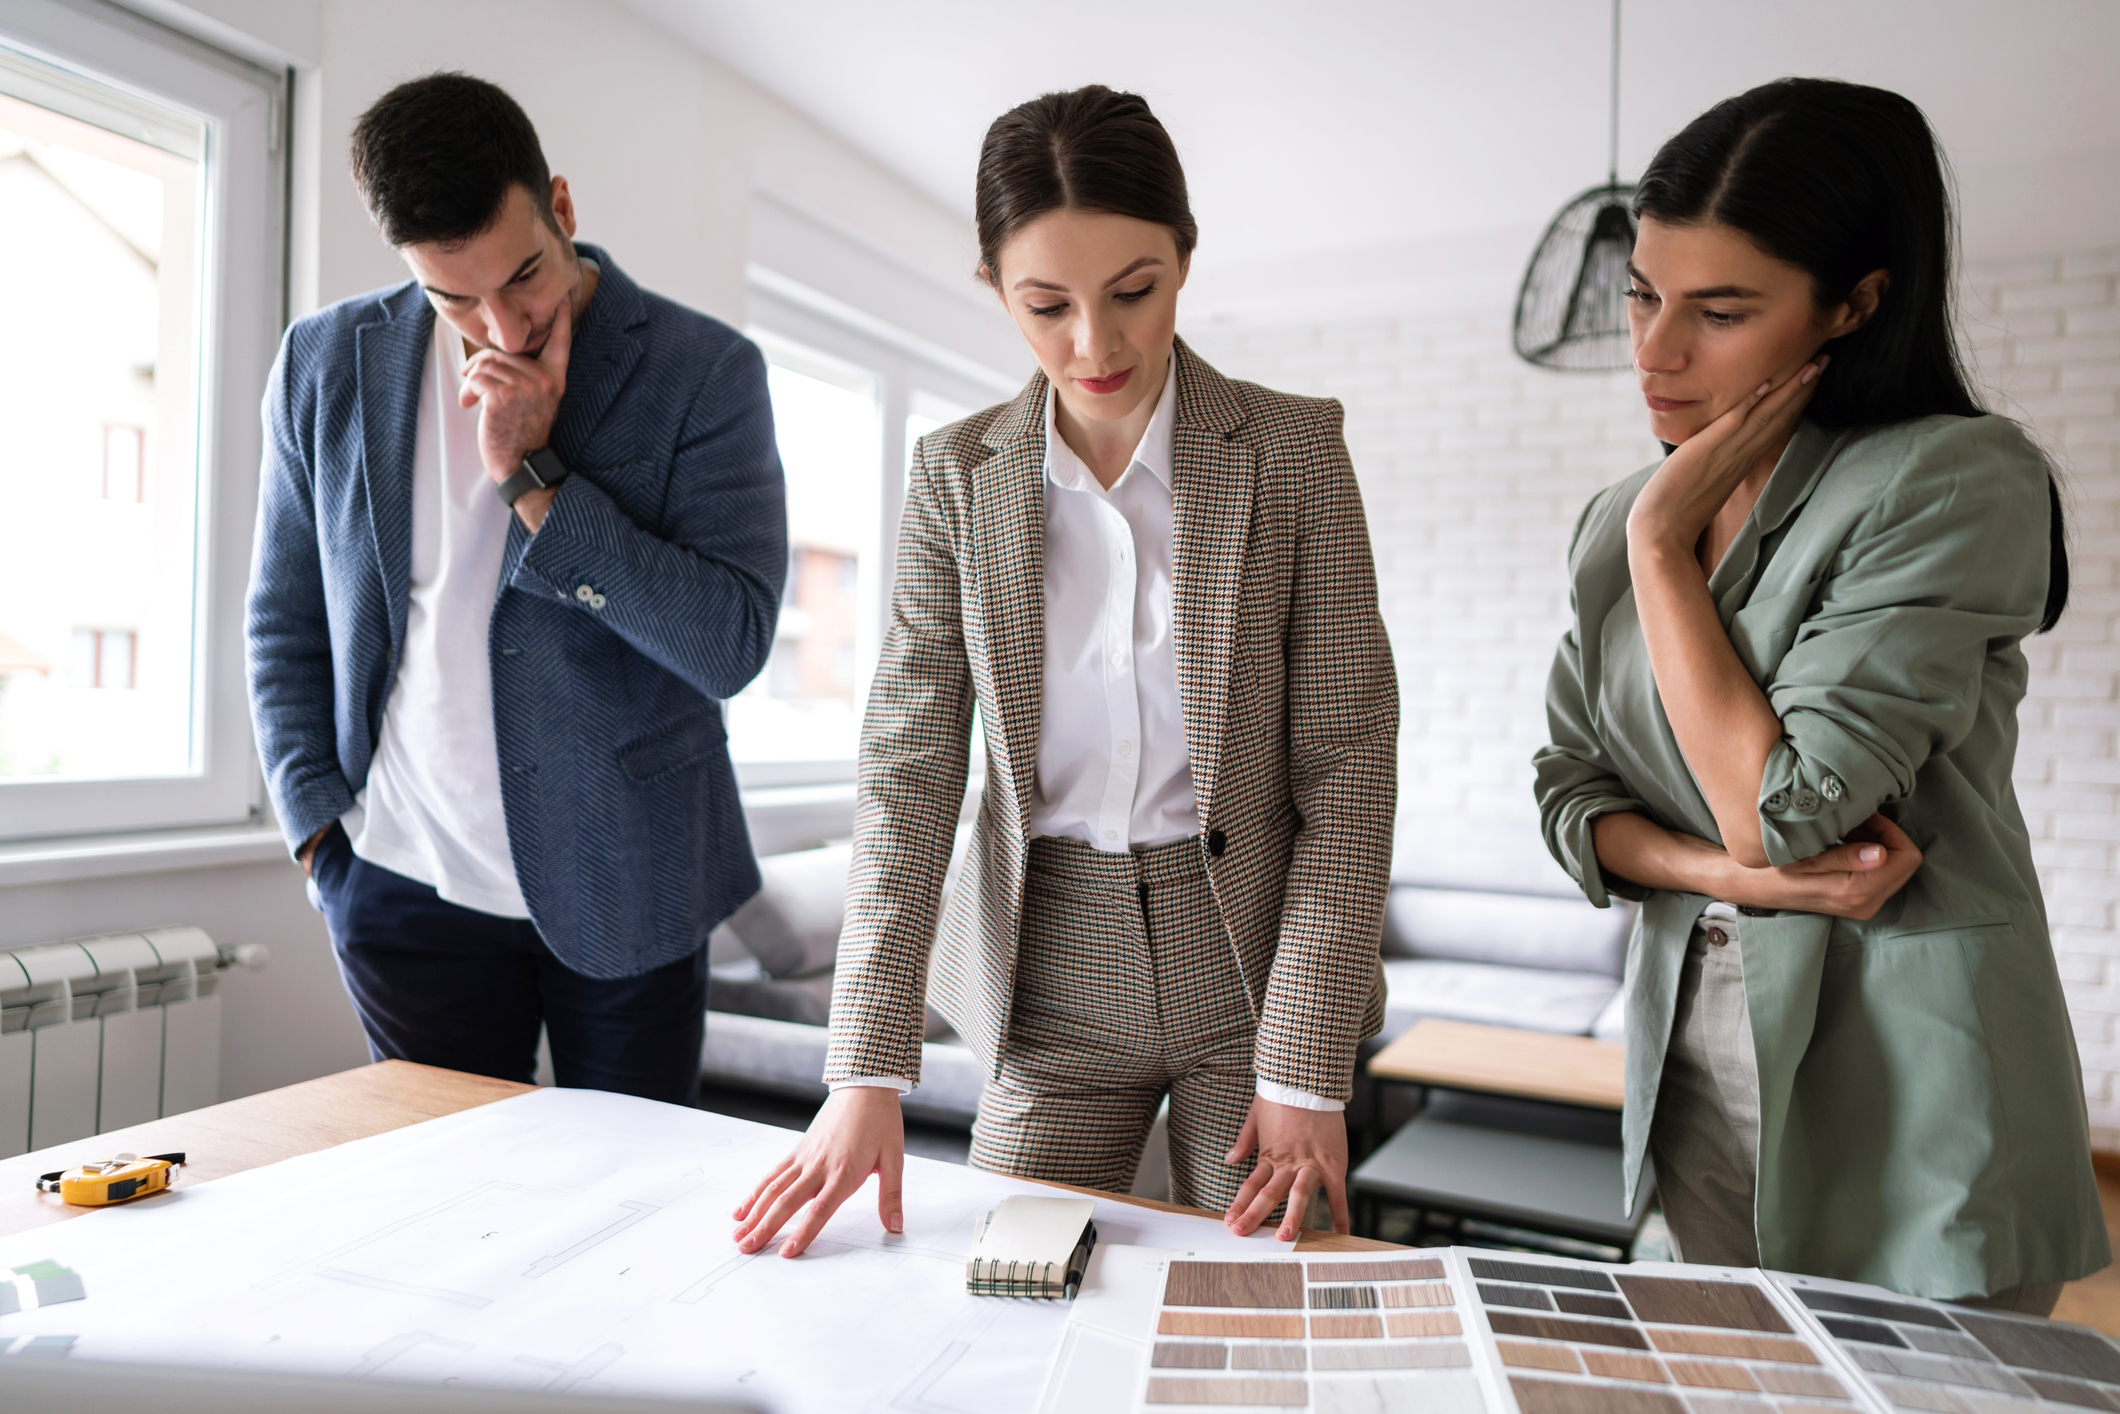 Stock image of a real estate agent standing at a table looking down at house plans and color selections, while a man and woman stand on either side of her with their arms crossed as if in disagreement with the agent